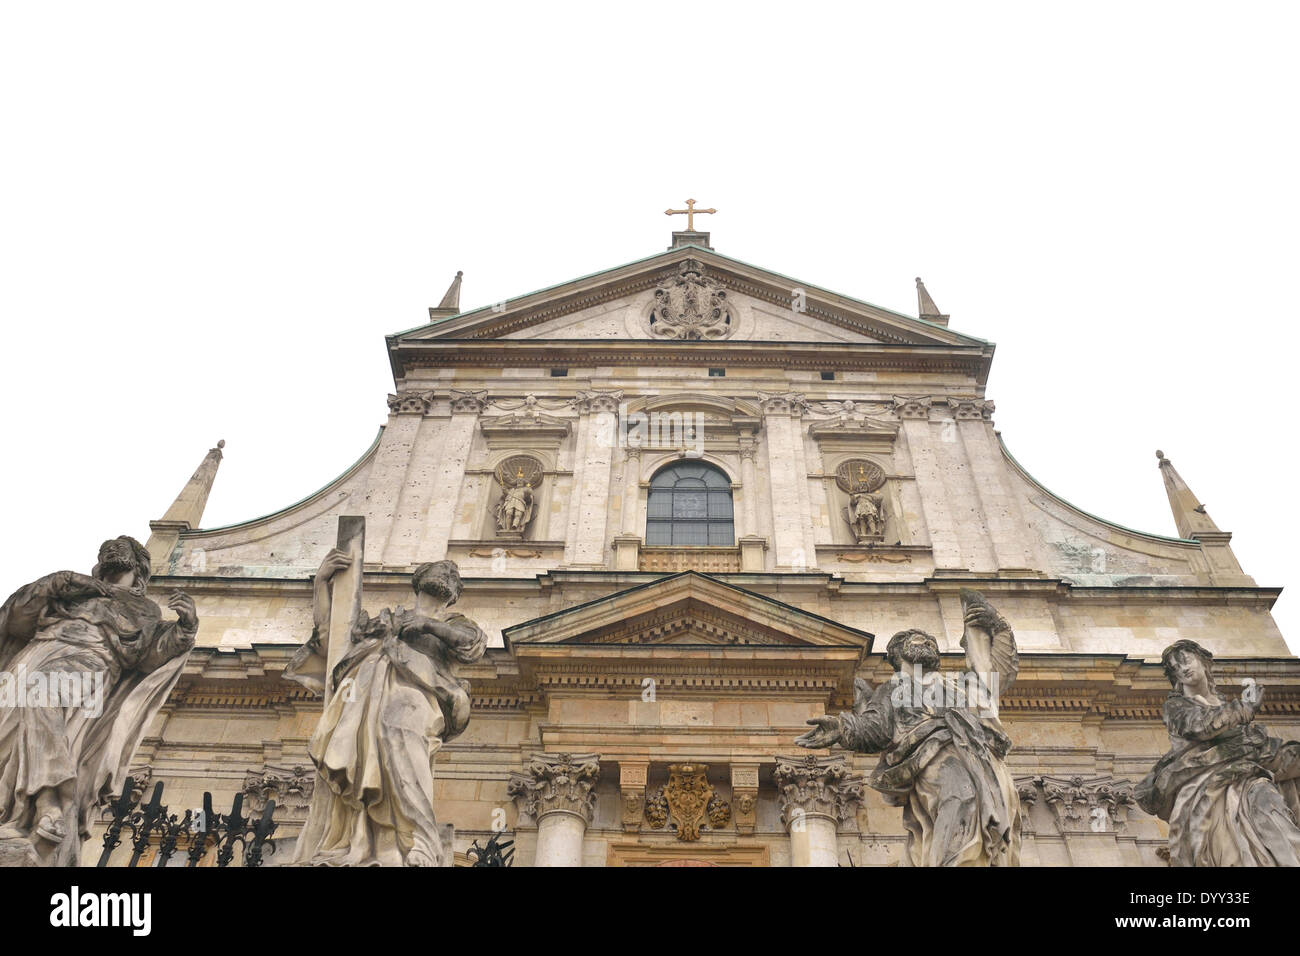 Church of Saints Peter and Paul (facade), in the Old Town district of Krakow Stock Photo